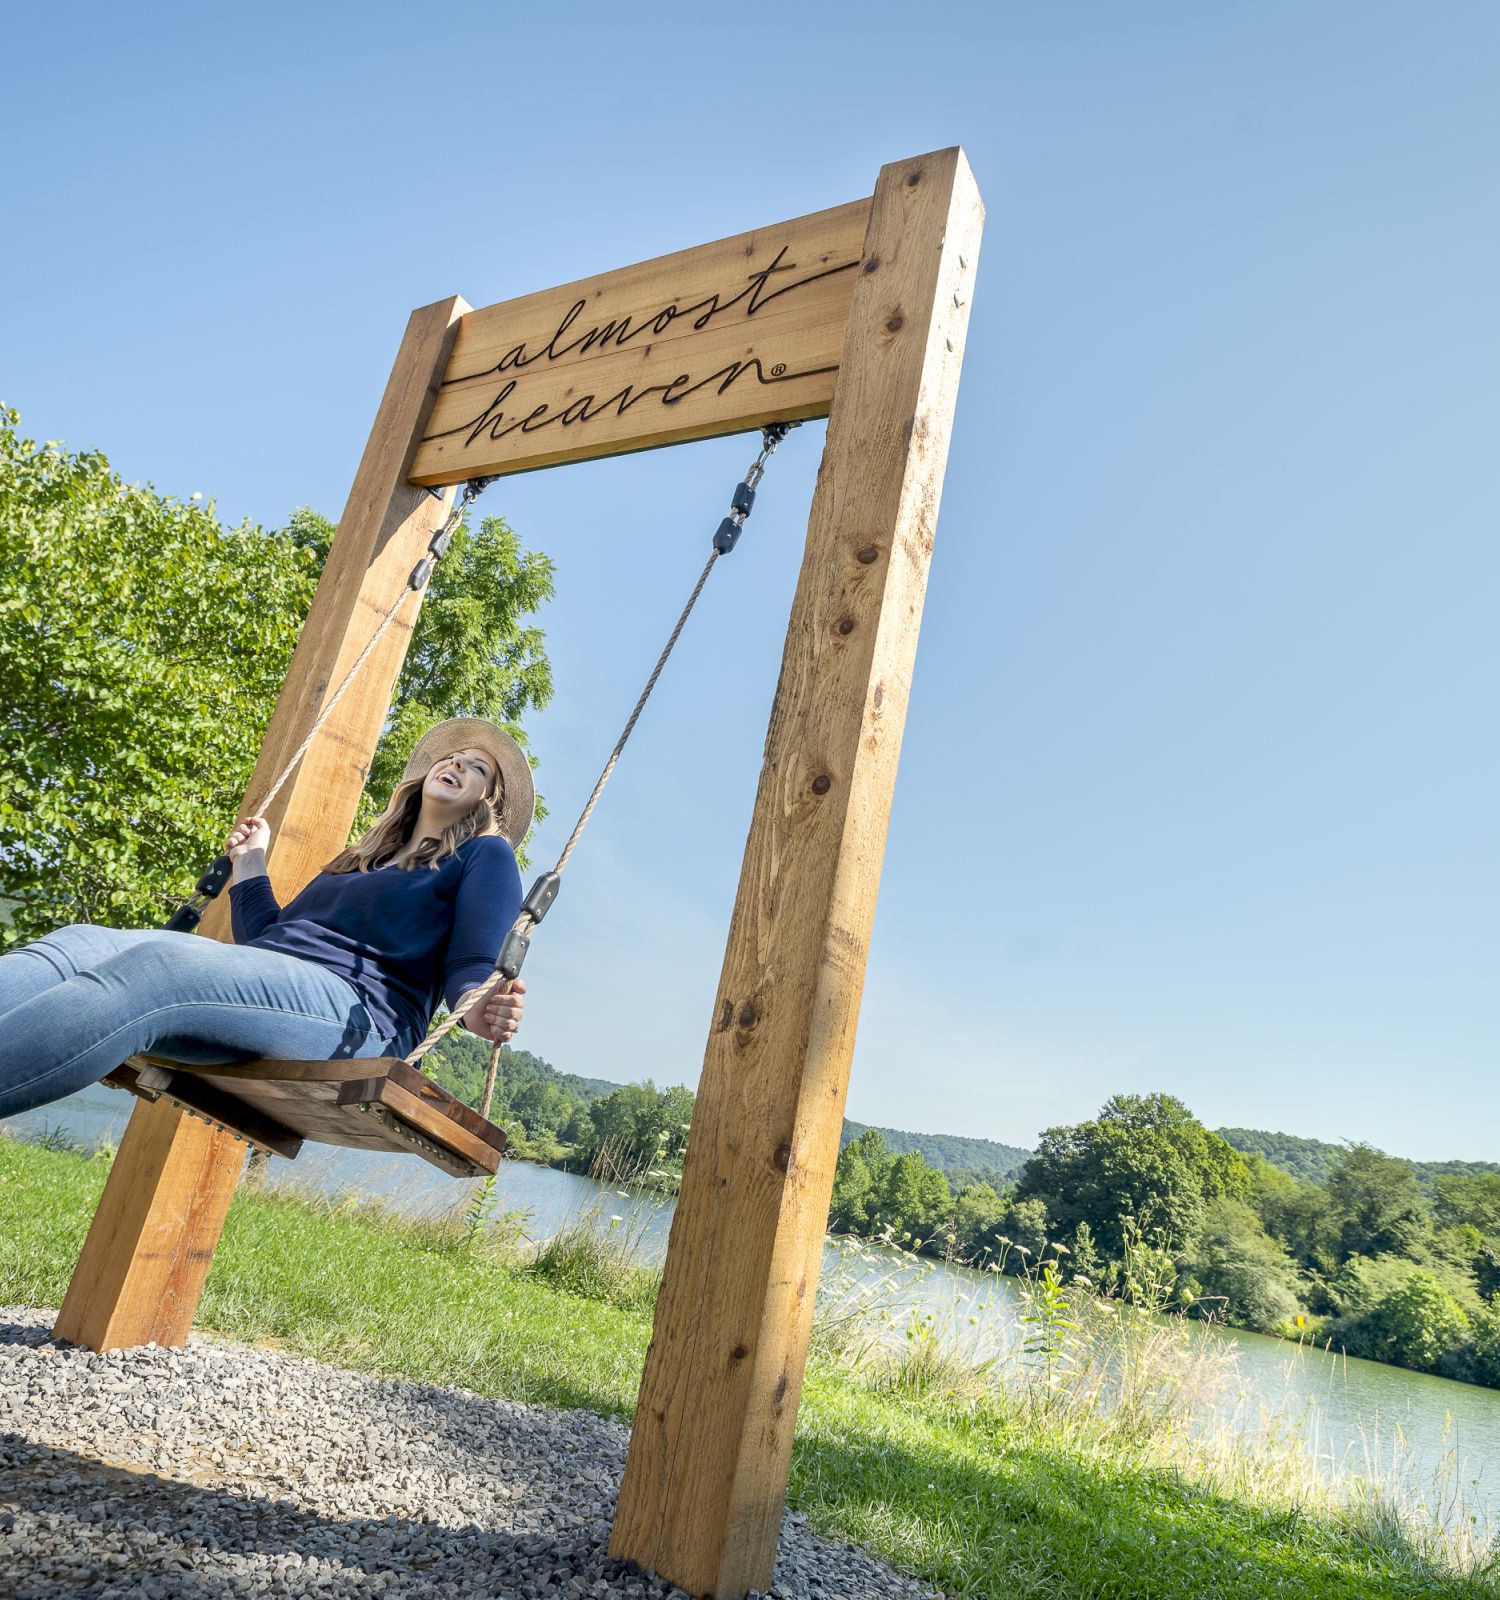 A person is swinging on a large wooden swing by a scenic lake with trees in the background. The structure has 